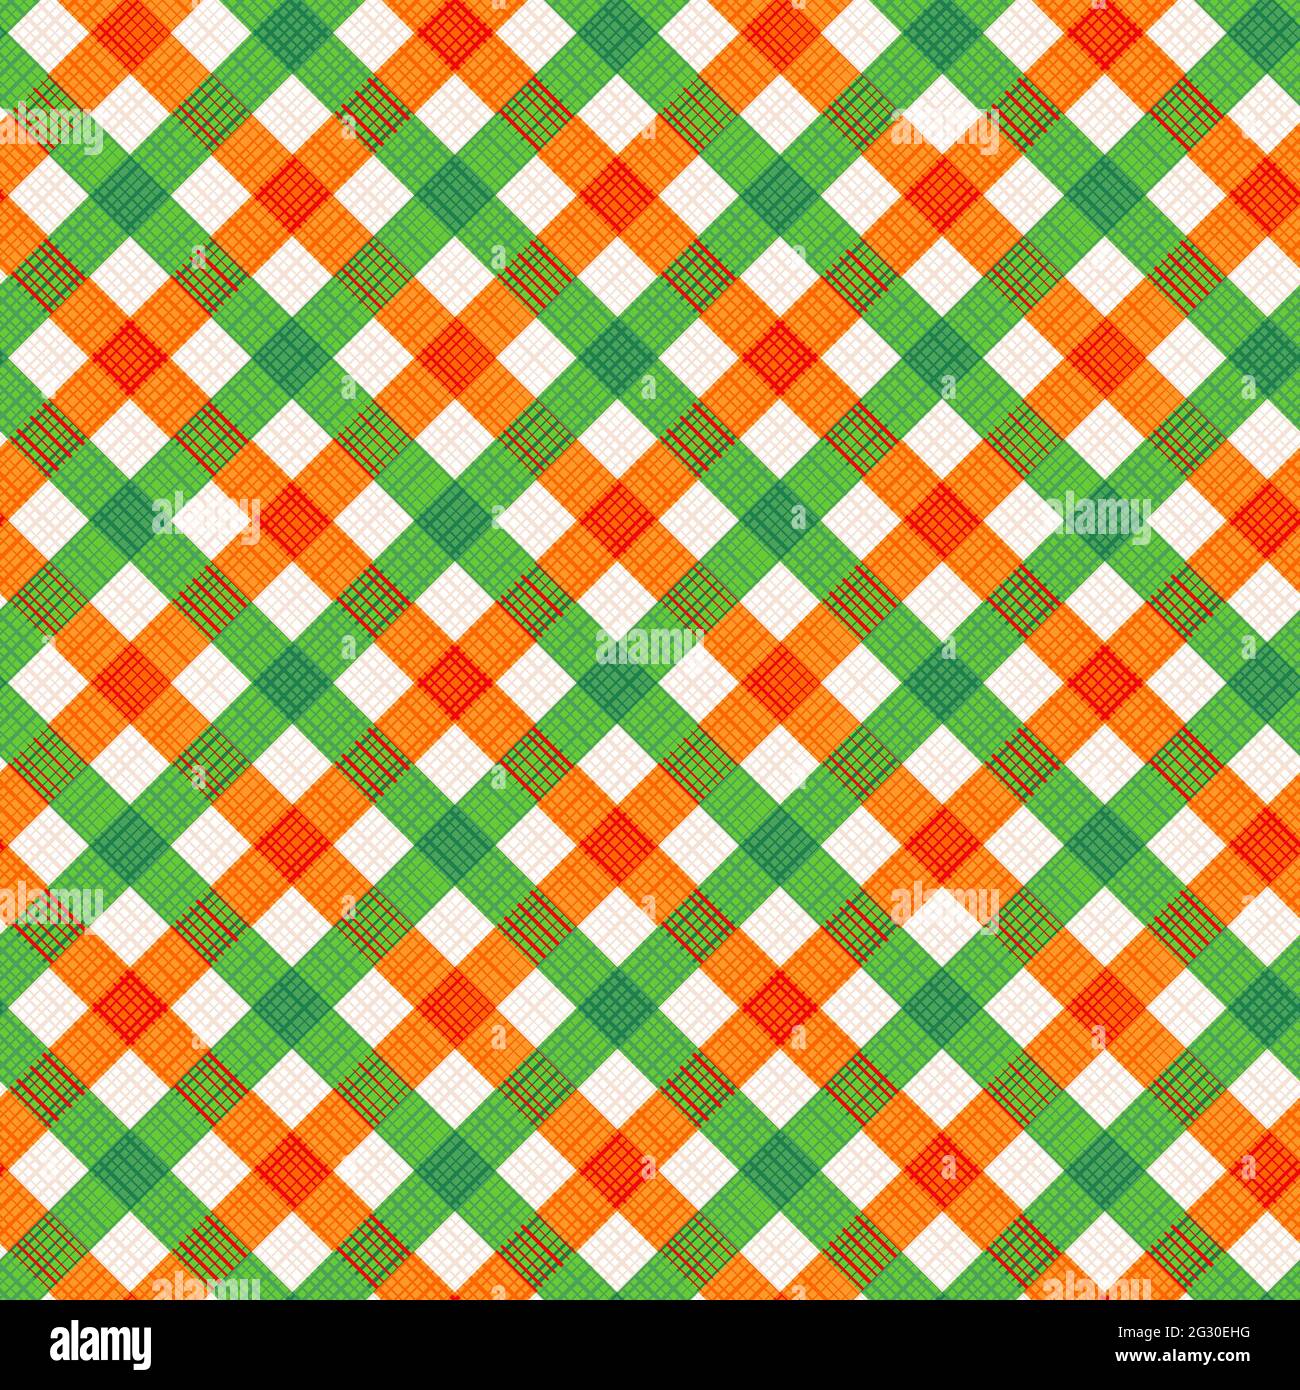 Gingham repeat or seamless pattern, background, wallpaper. Fabric texture visible. You see 4 tiles. Autumn, harvest or Thanksgiving colors. Stock Photo